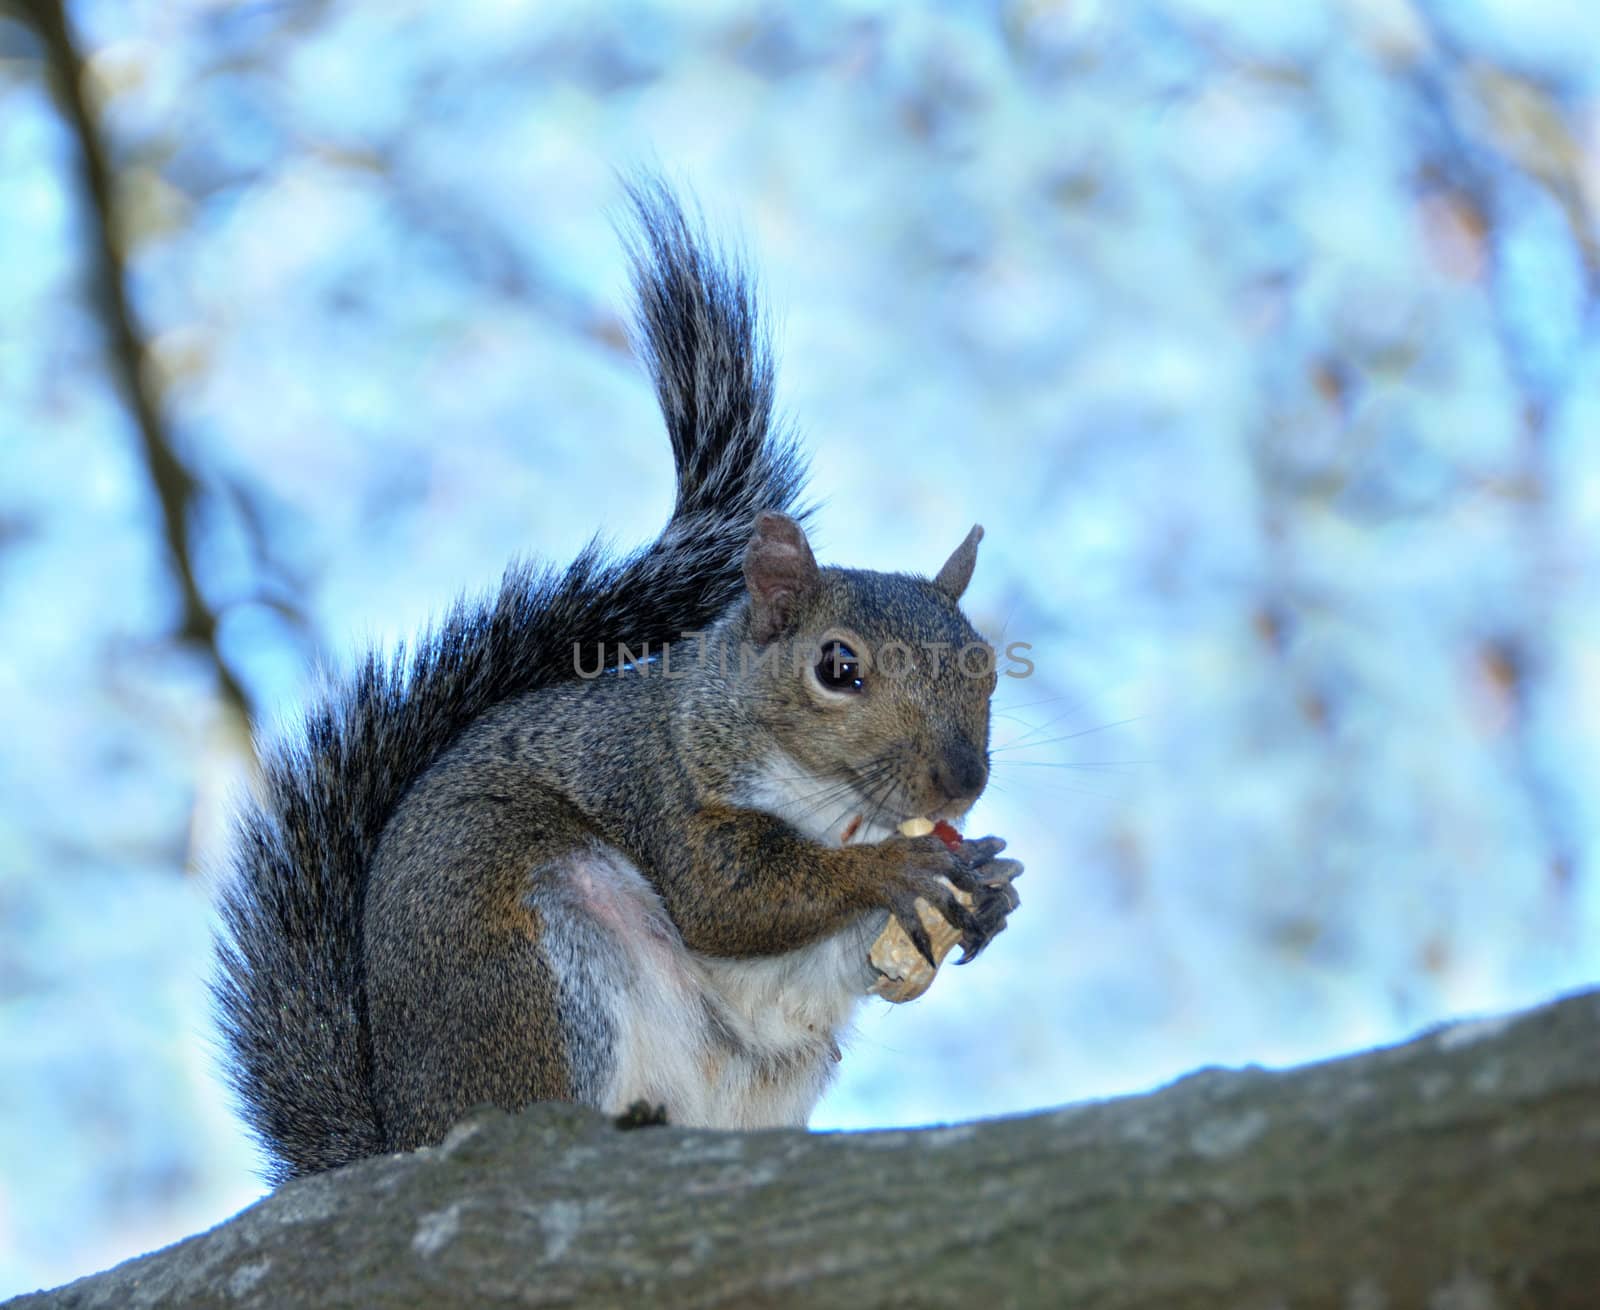 Squirrel on a tree holding a peanut shell 